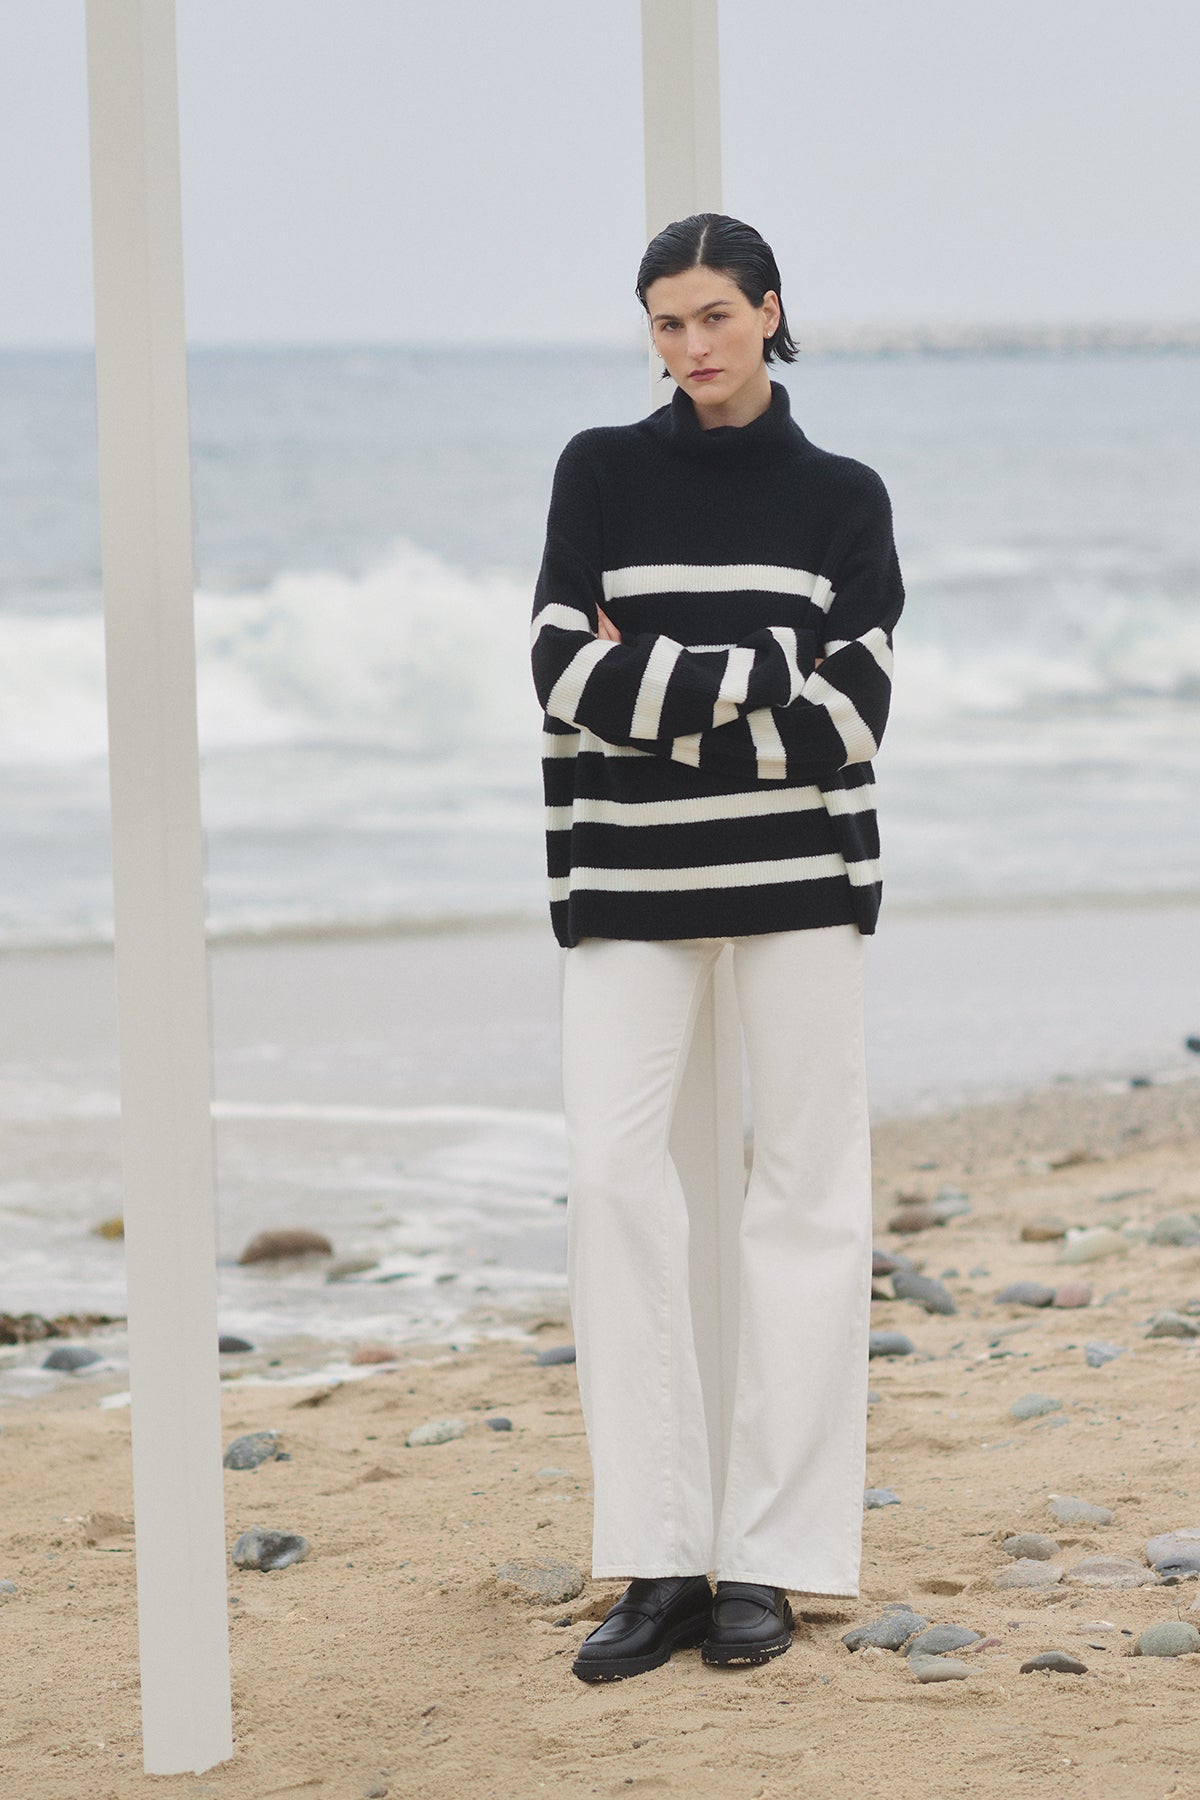 A woman wearing an oversized fit, Velvet by Jenny Graham's ENCINO SWEATER, a black and white striped turtleneck sweater, and white pants on the beach.-35547904704705